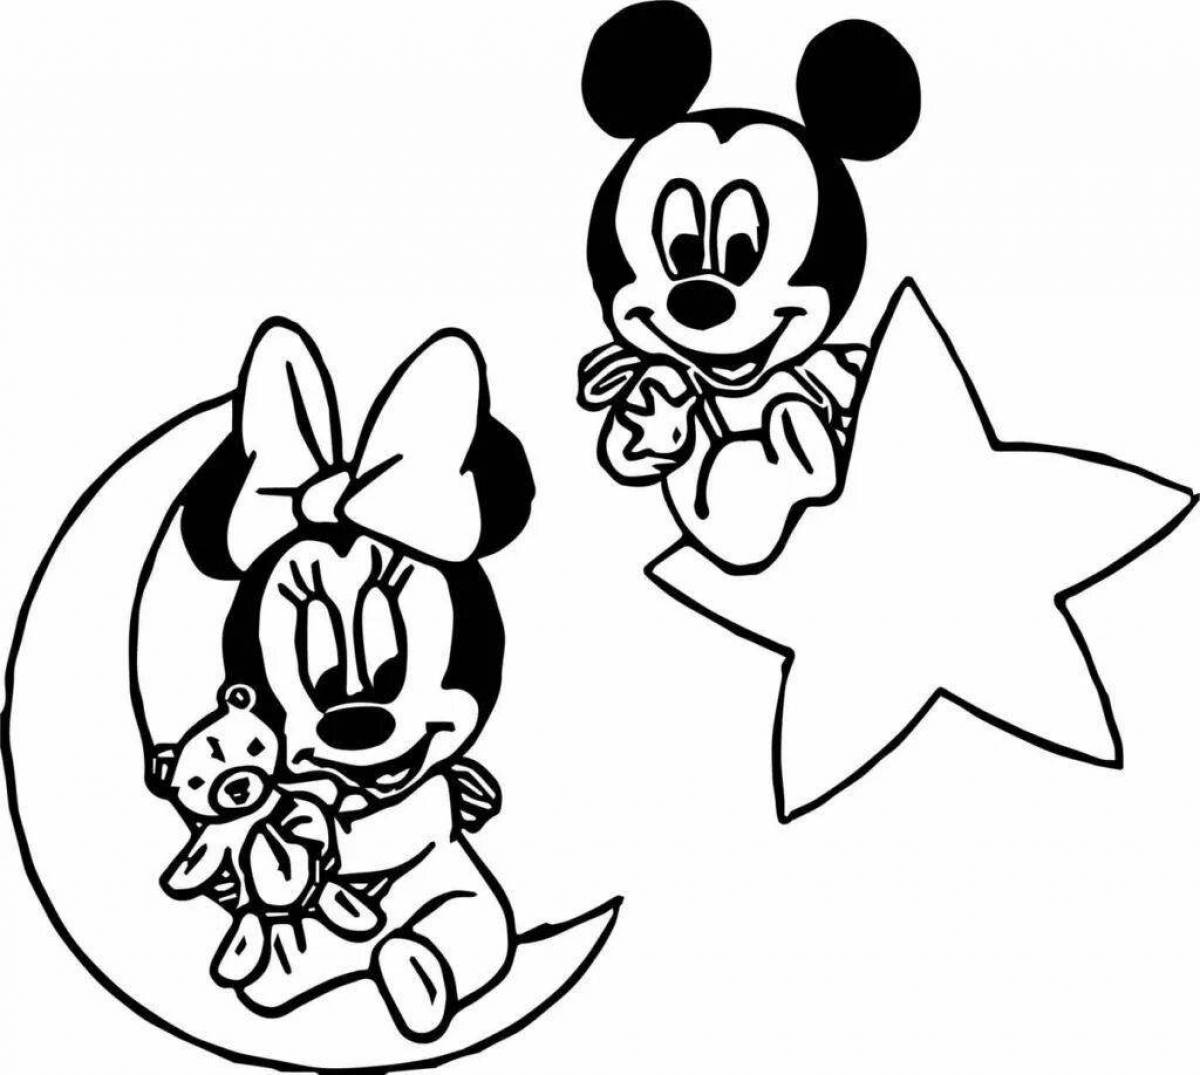 Mickey mouse for kids #1